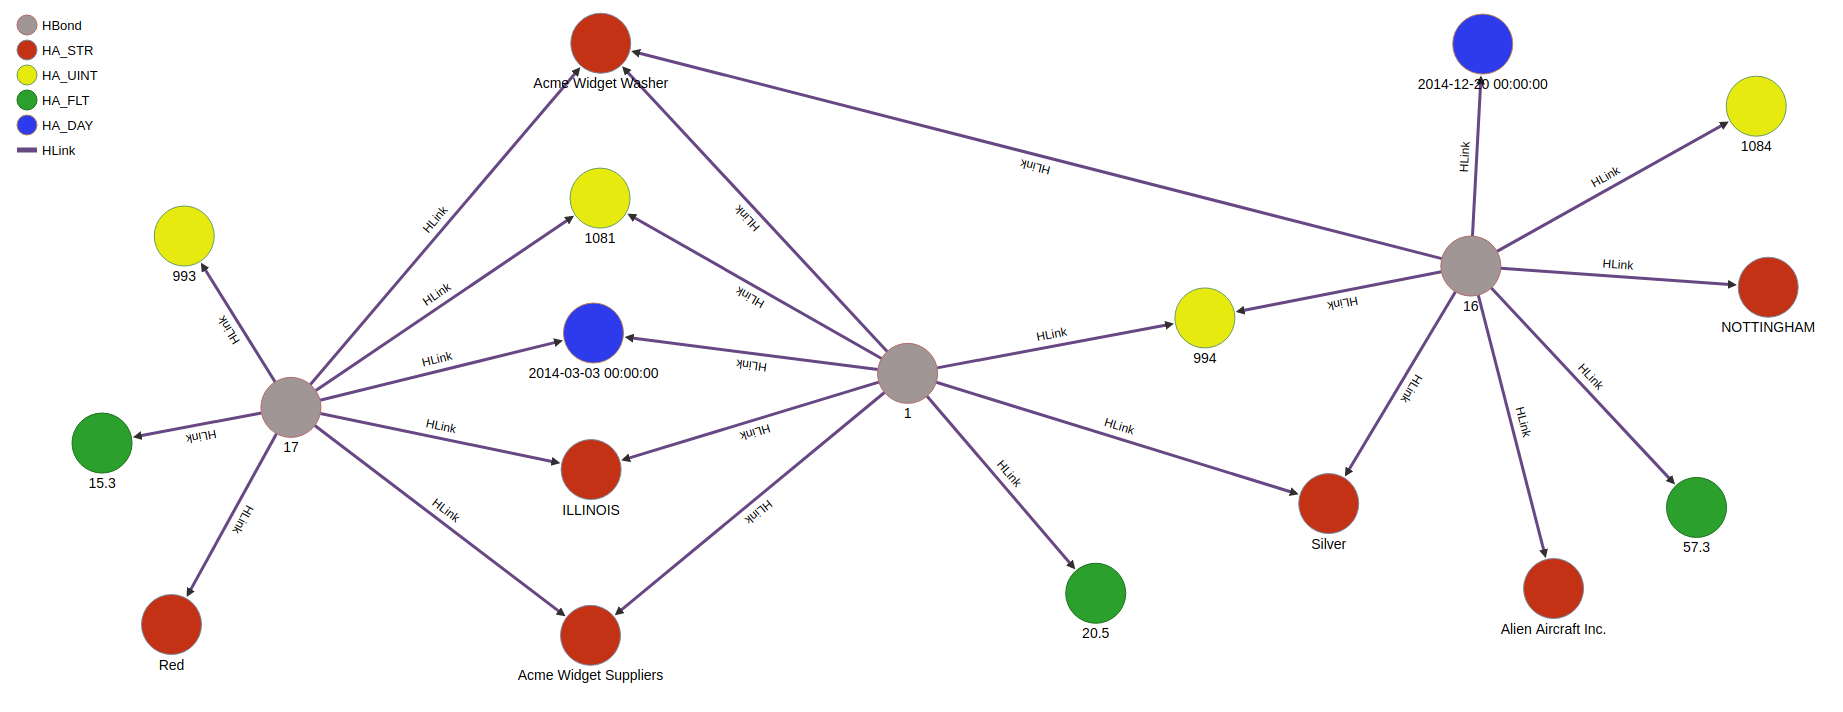 Visualization of hypergraph paths based on TRIACLICK associations